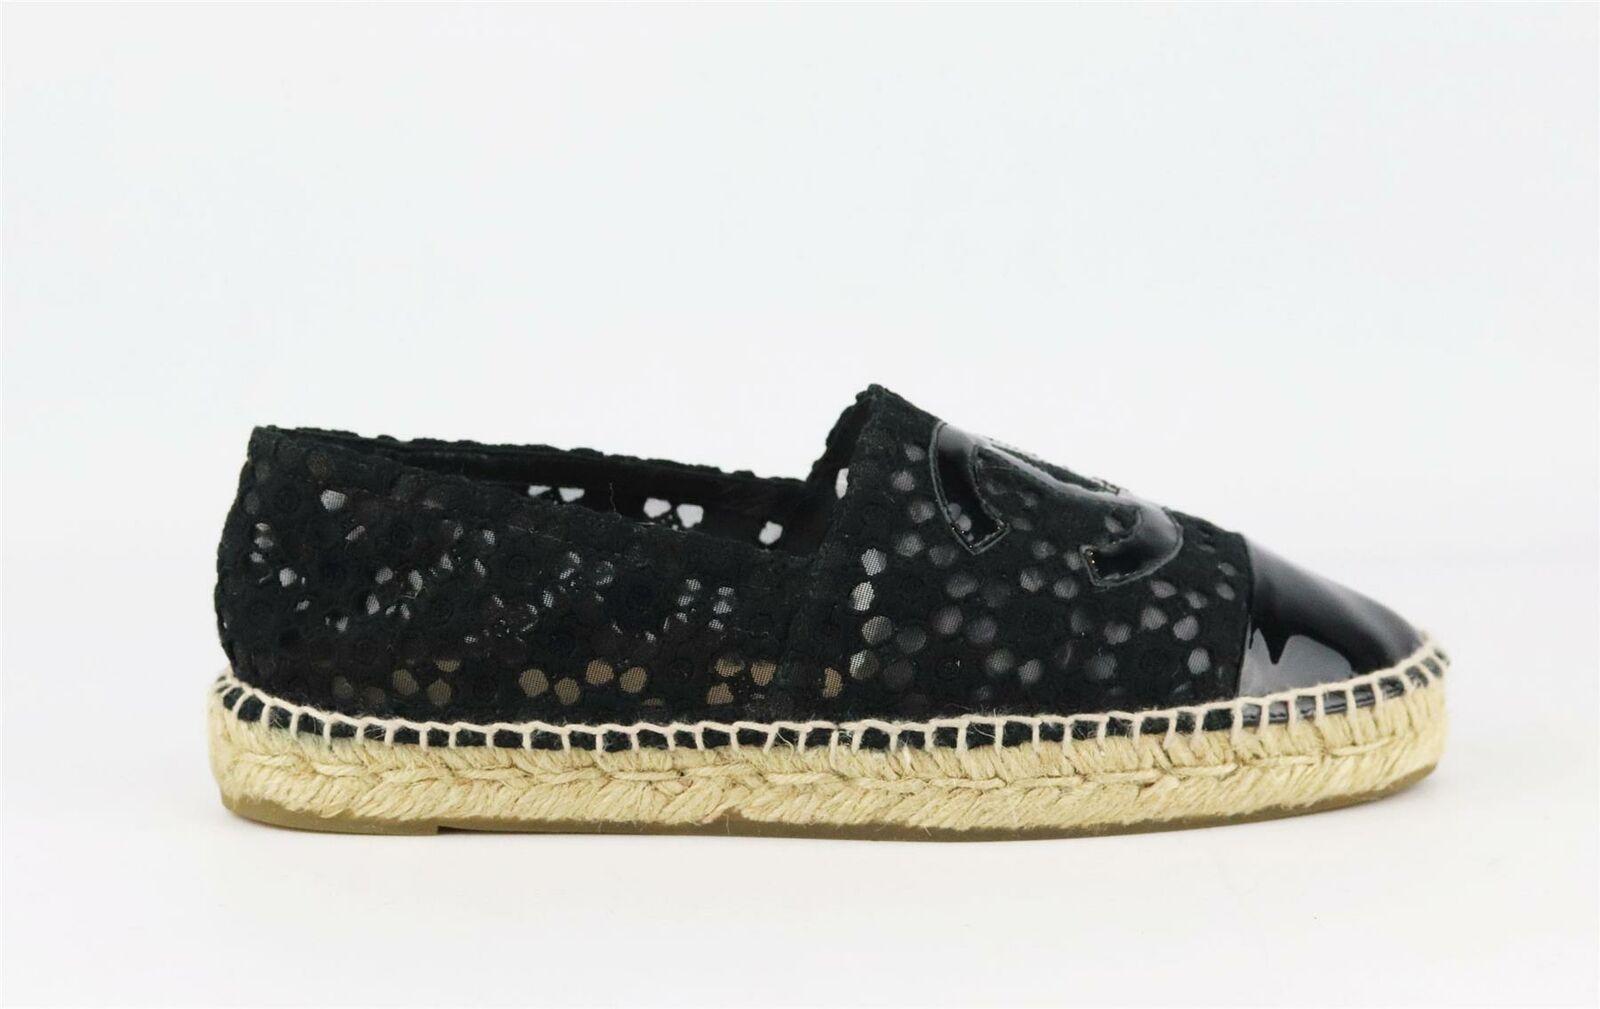 Chanel's classic espadrilles in black crochet, featuring the brand's trademark interlocking CC logo on the front in a black patent leather, they have a thick jute sole and a reinforced toe which offers a comfortable and supportive fit.
Sole measures